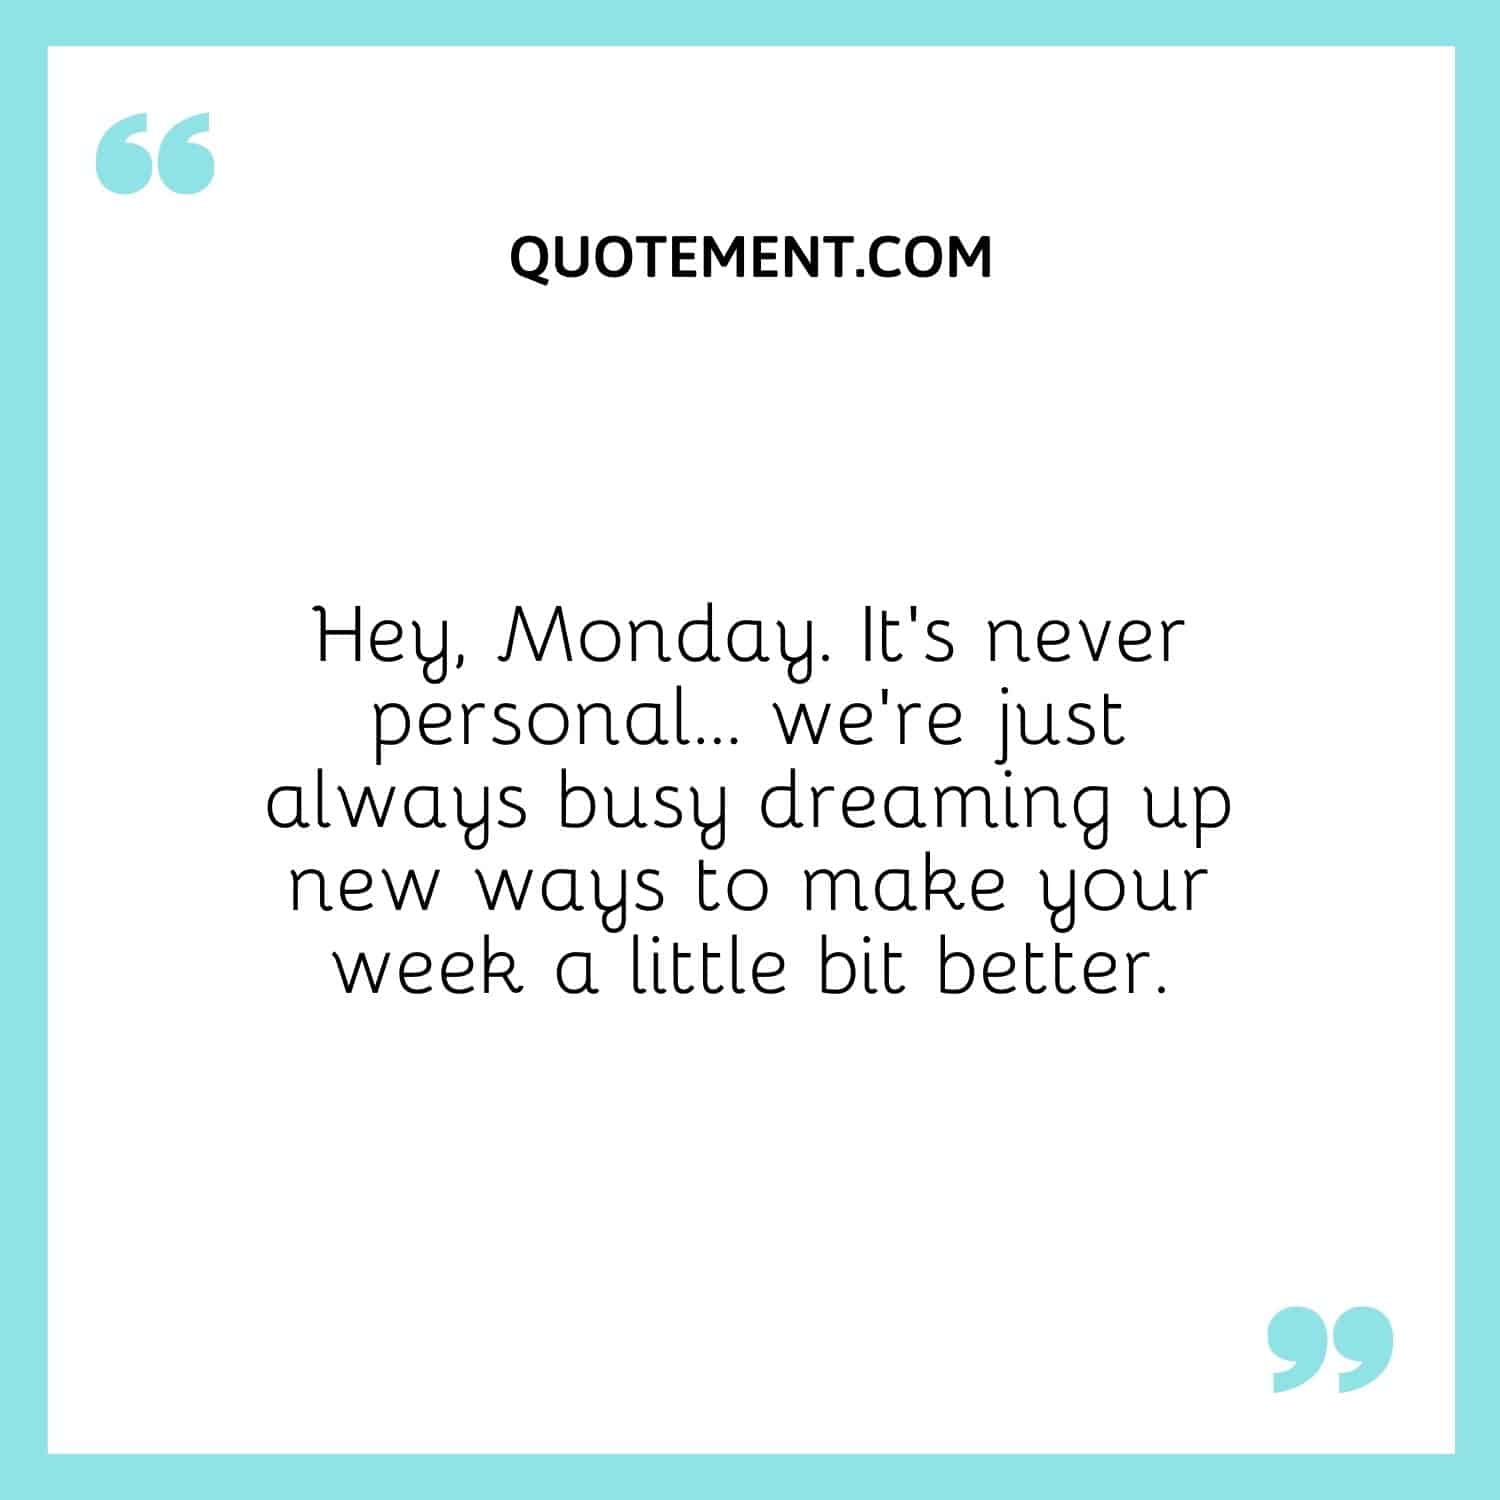 Hey, Monday. It’s never personal